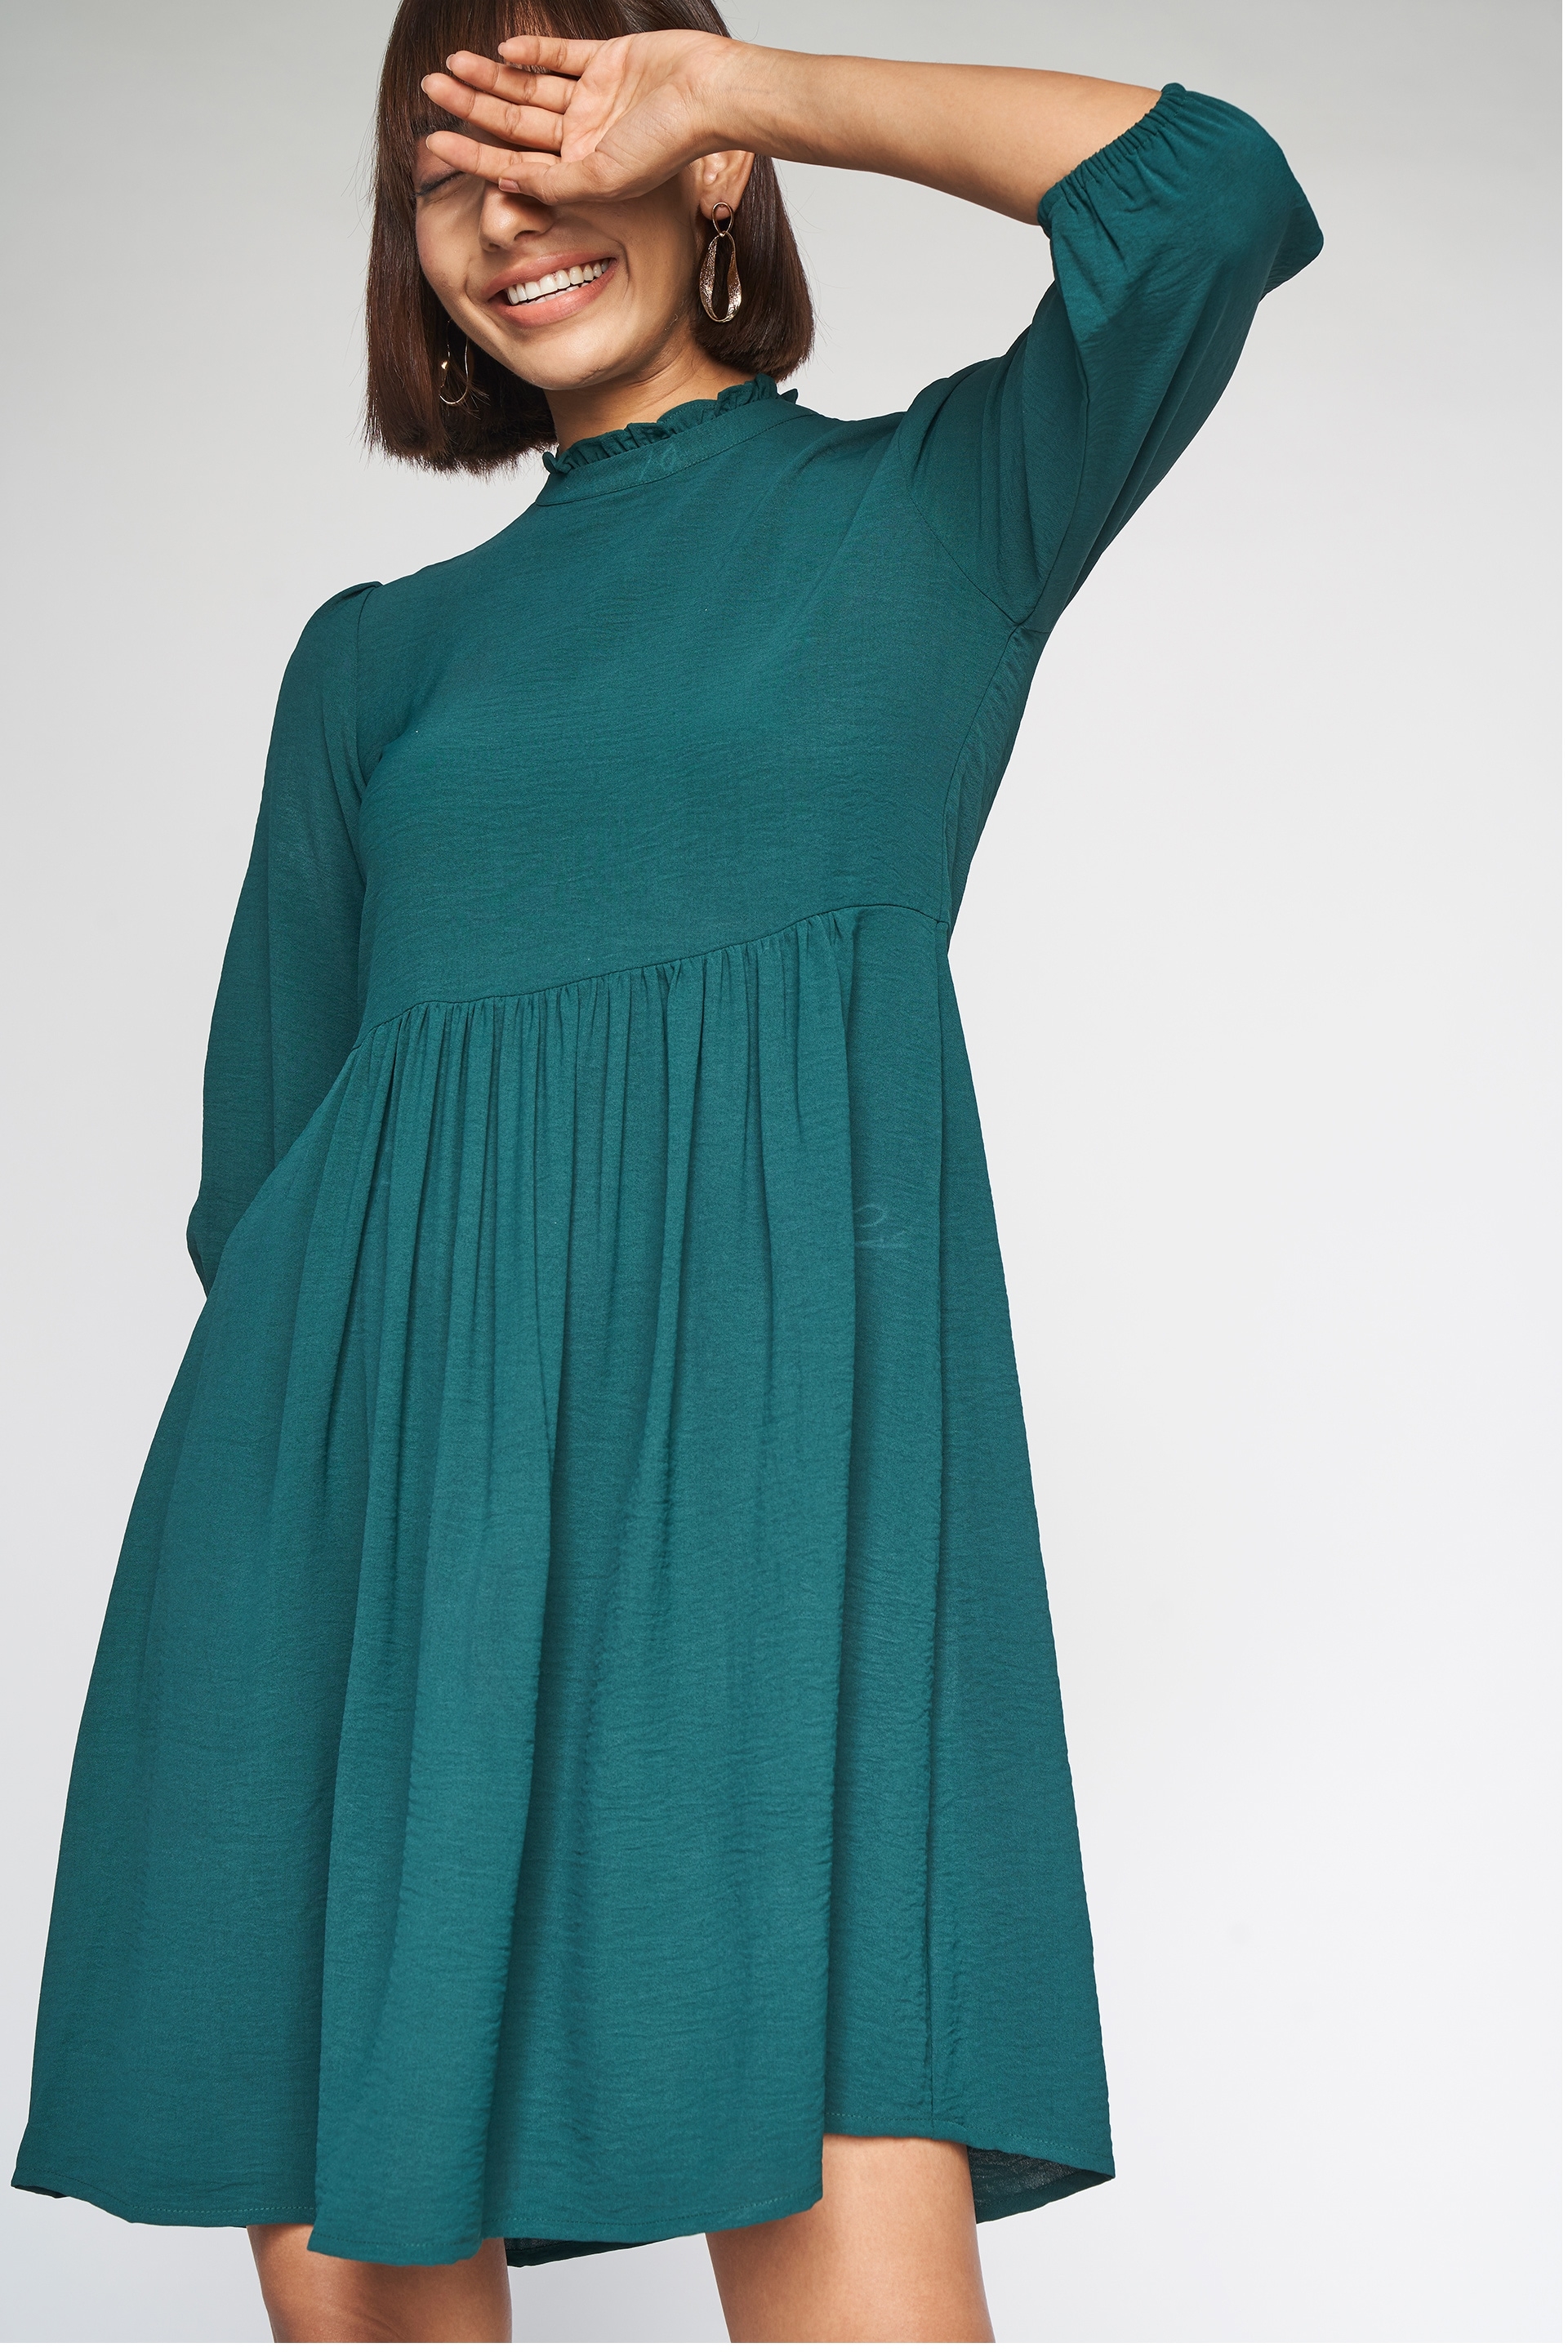 AND | Green Solid Fit and Flare Dress